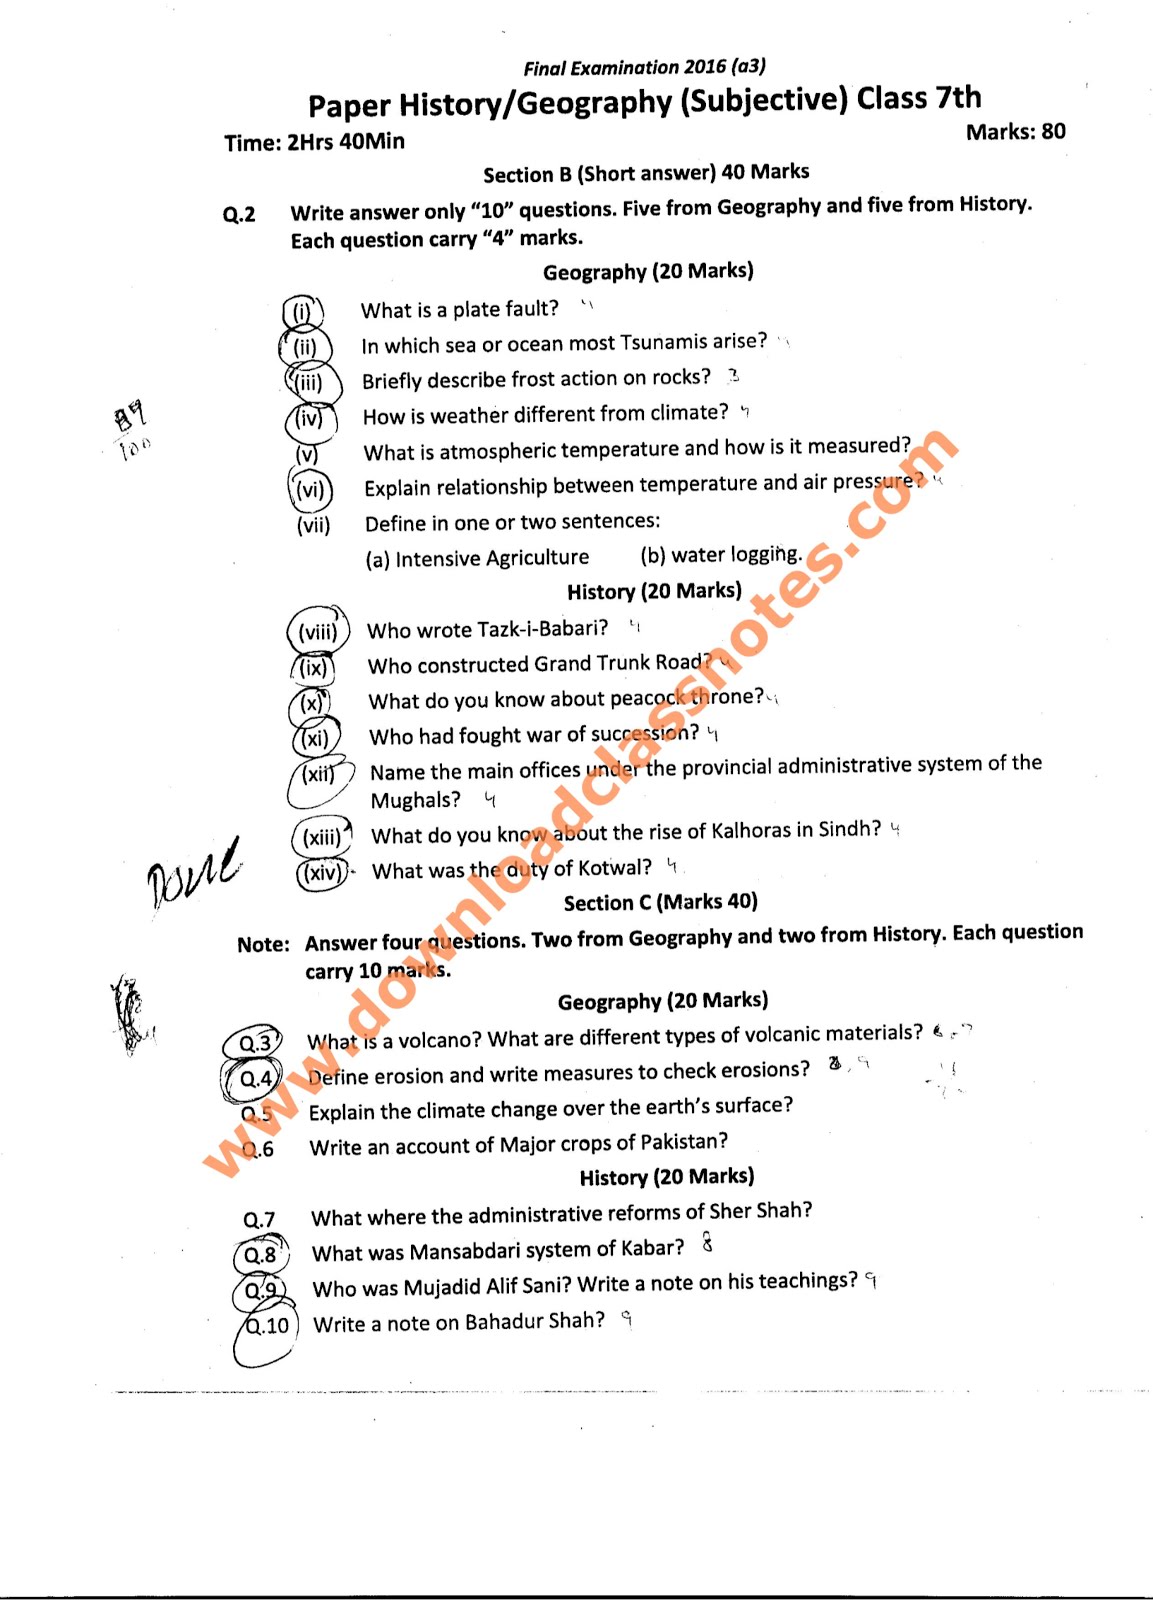 geography essay questions neco 2016